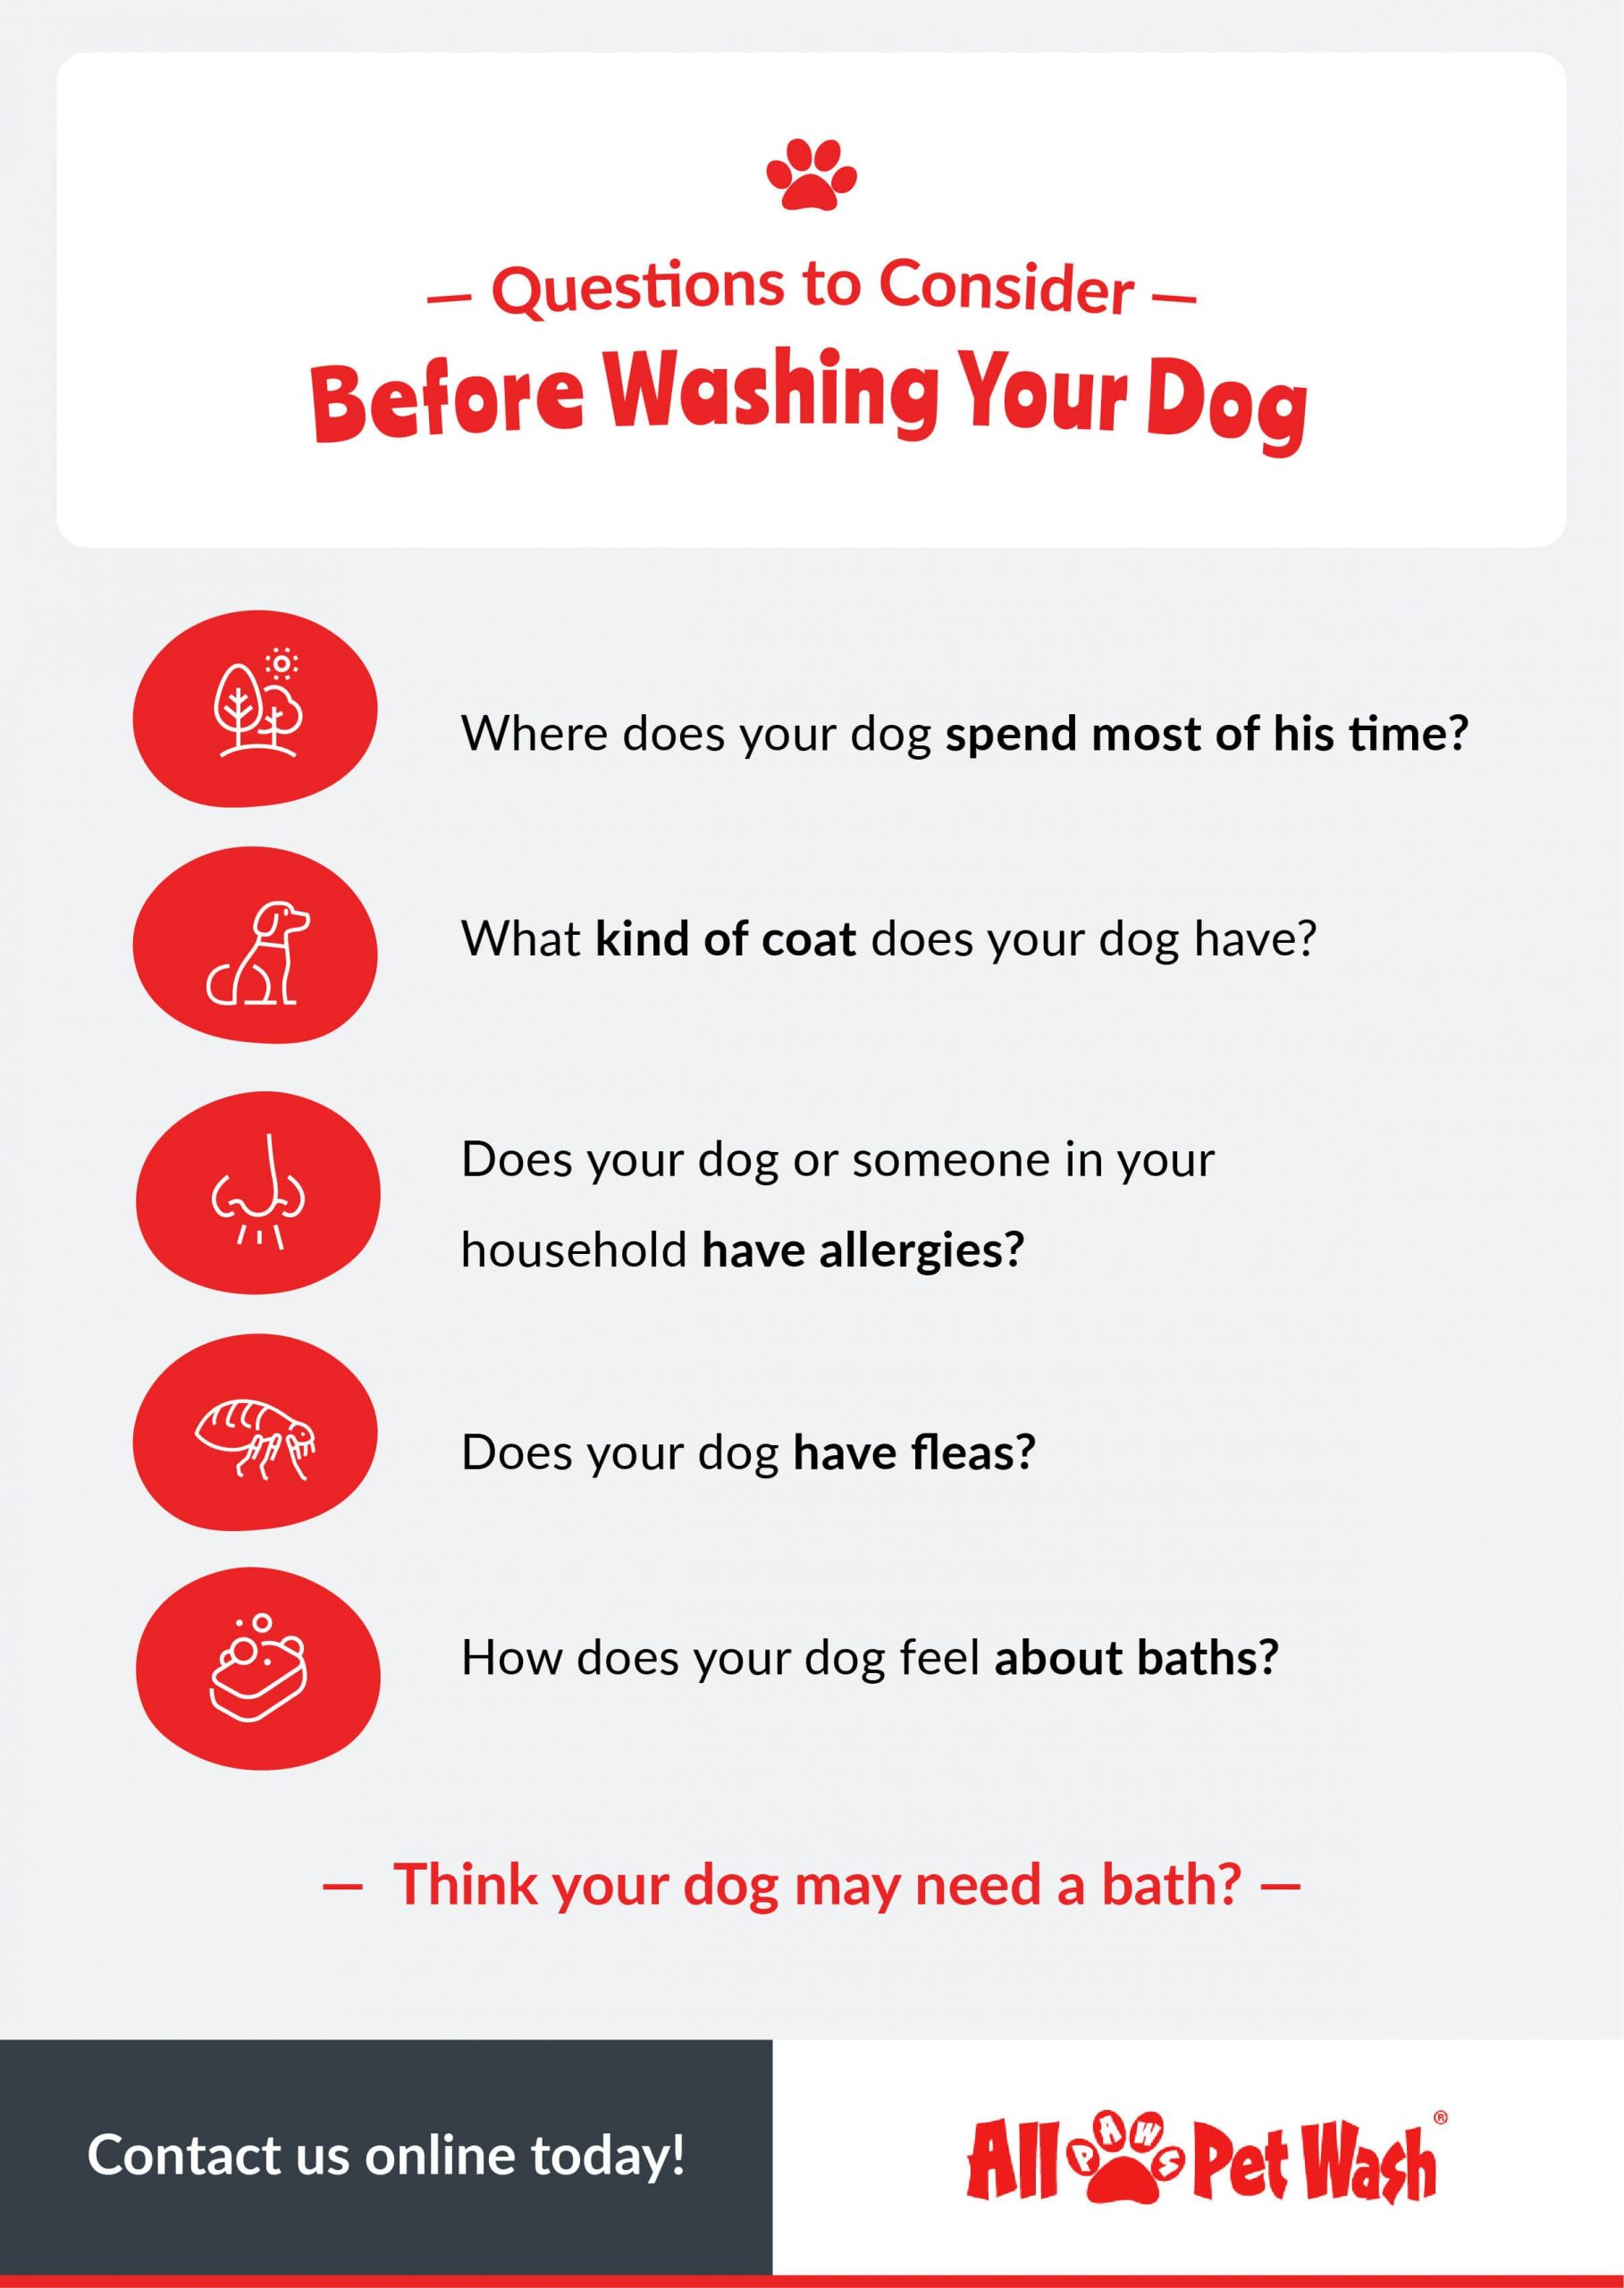 Micrographic - Questions to Consider Before Washing Your Dog